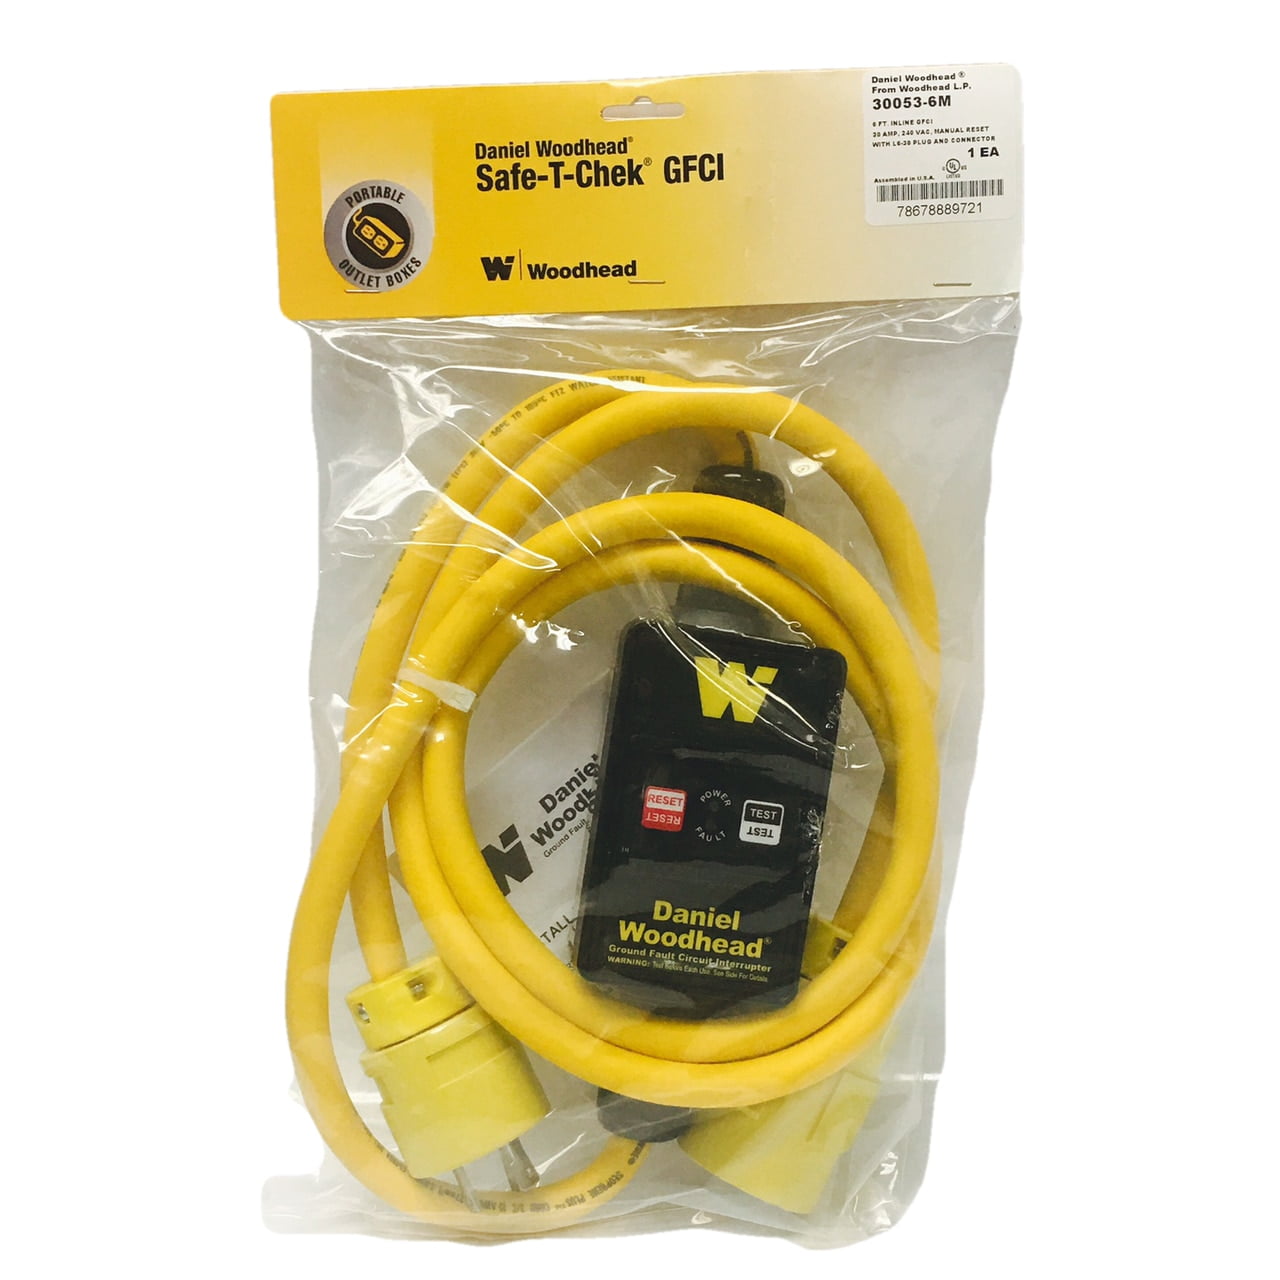 ELEGRP 2 ft. 15 Amp In-Line Self-Test Automatic Reset Portable GFCI Plug with 3-Outlet Cord, Yellow